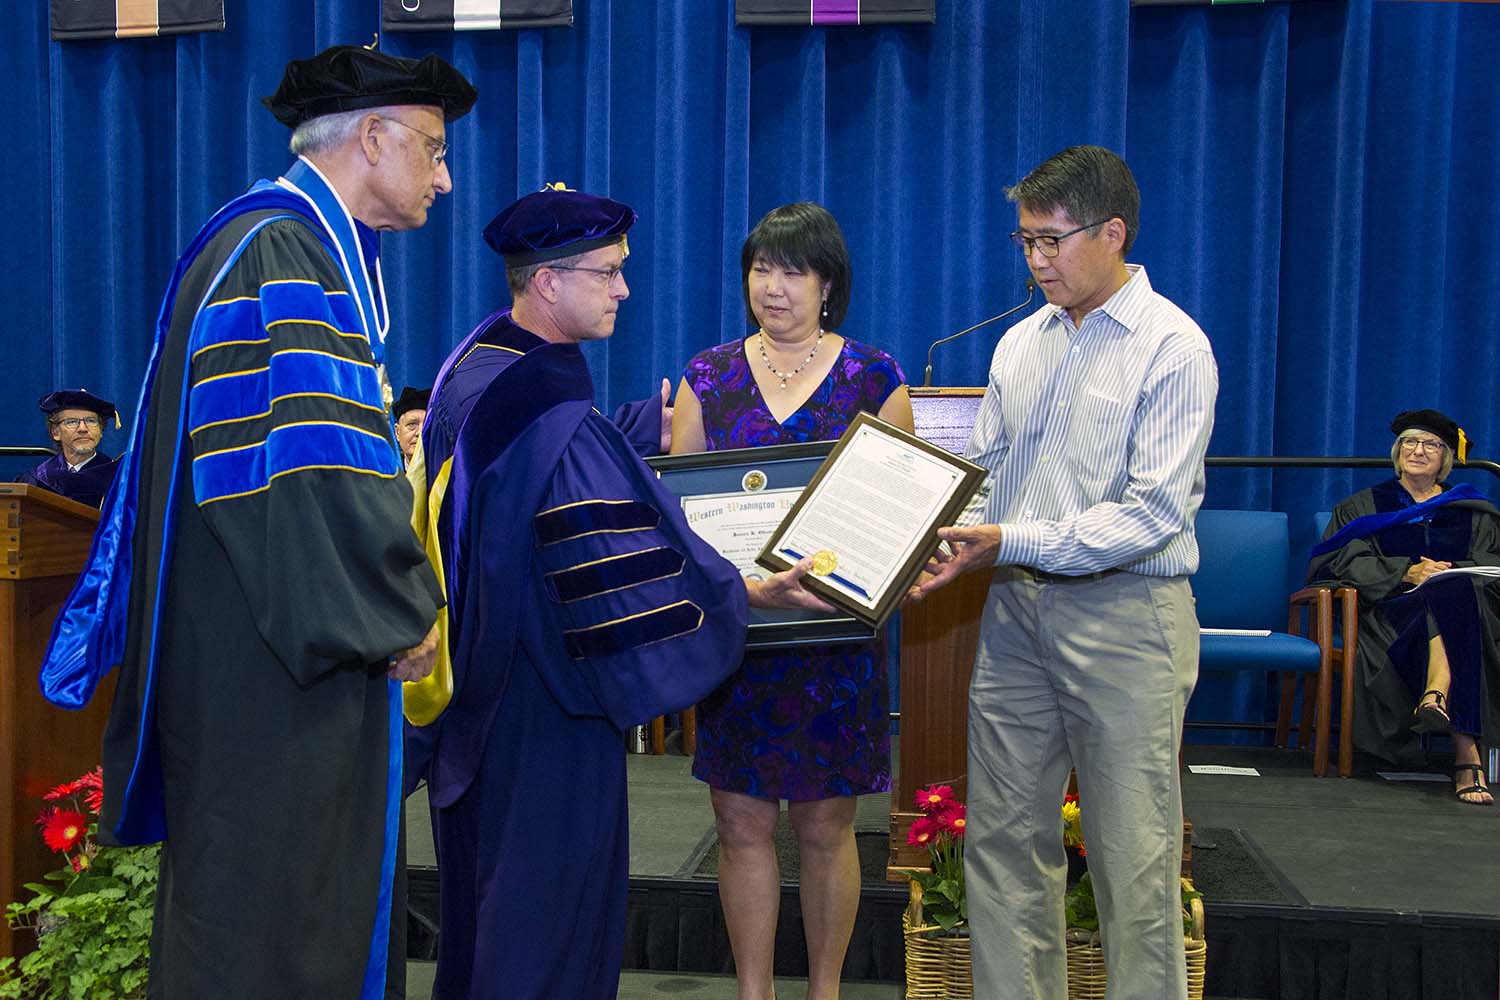 President Sabah Randhawa and Provost Brent Carbajal present an honorary bachelor’s degree to James Okubo’s children Anne and Bill Okubo at Commencement in June.  